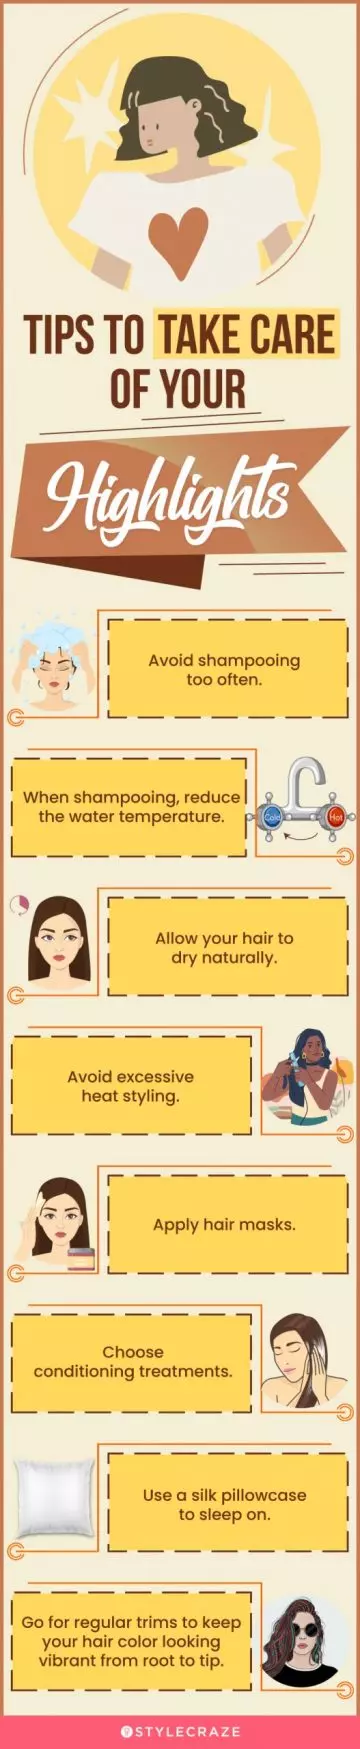 tips to take care of your highlights (infographic)